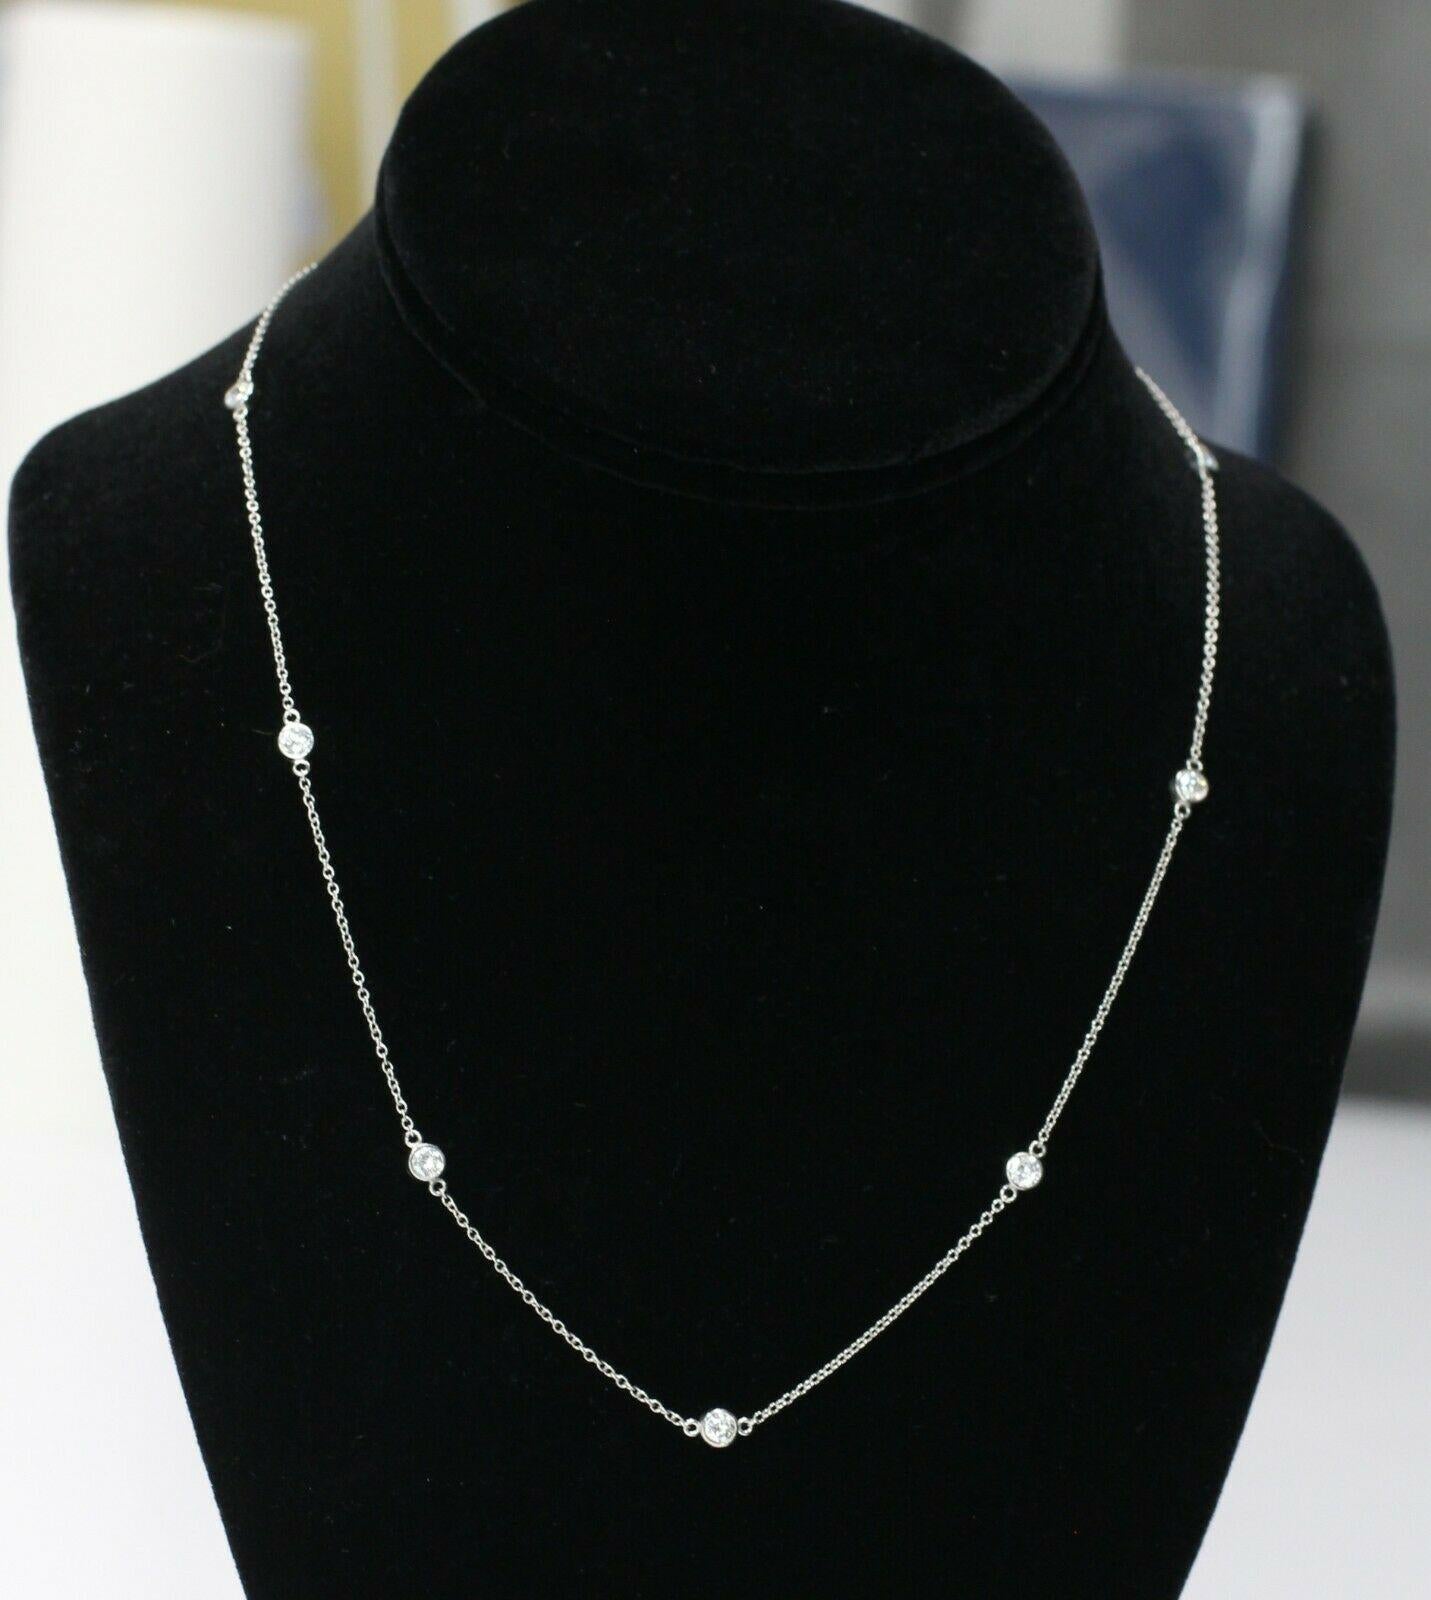  Specifications:
    main stone:  7 PIECES ROUND DIAMOND
    diamonds:
    carat total weight: APPROX 1.05 CTw
    color: H
    clarity: SI2
    brand: UNBRANDED
    metal: PLATINUM
    type: DAINTY NECKLACE
    weight:  4.8 GrS
    LENGTH: 18